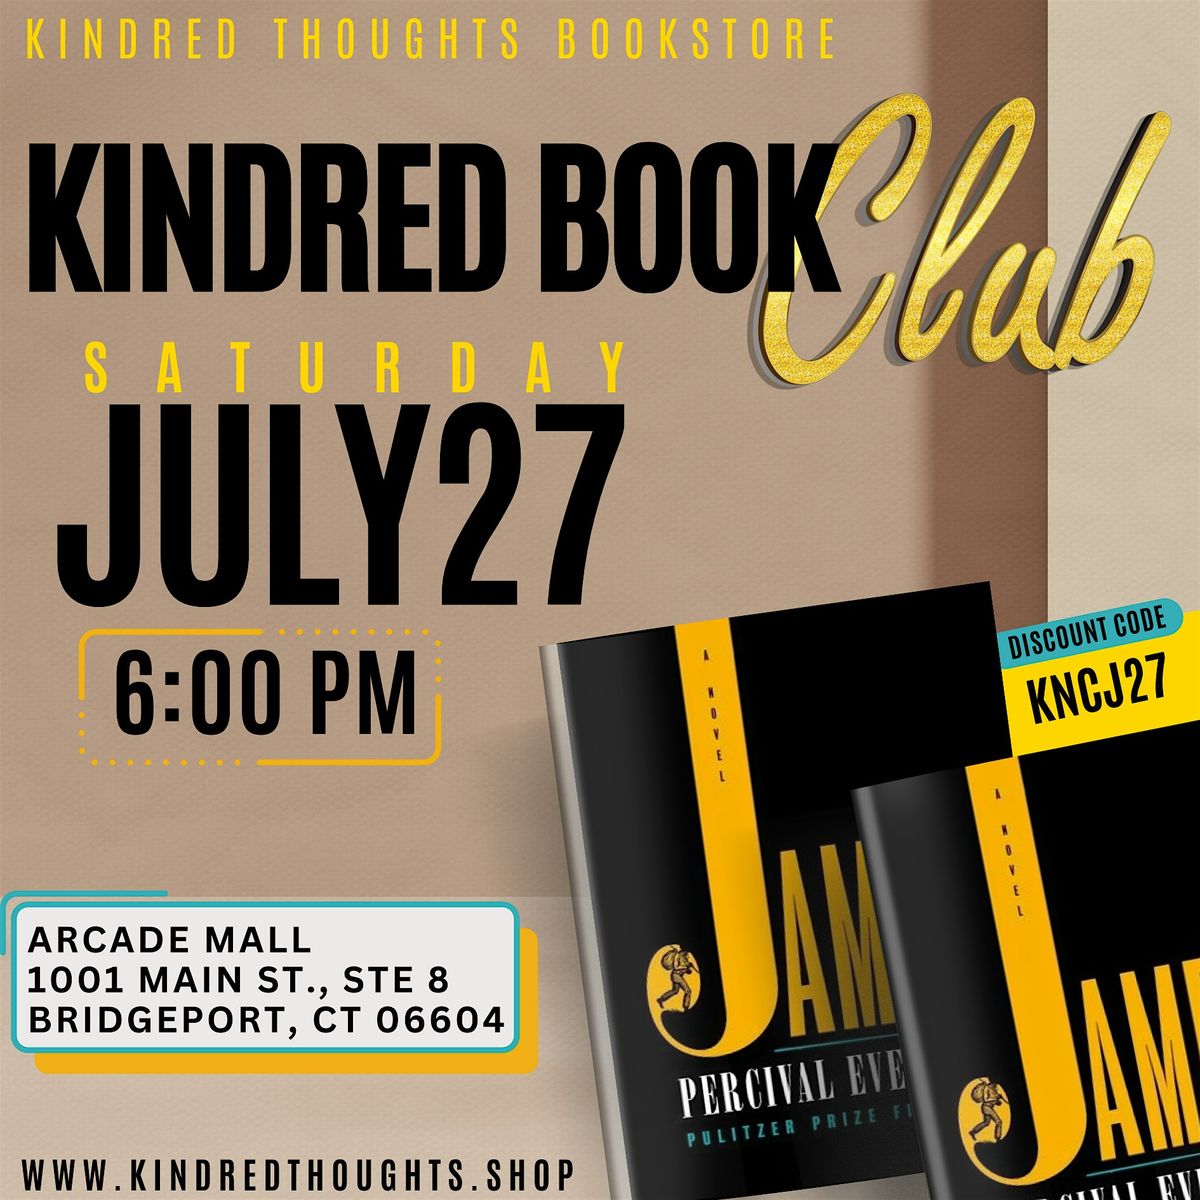 Kindred Book Club reads James by Percival Everett